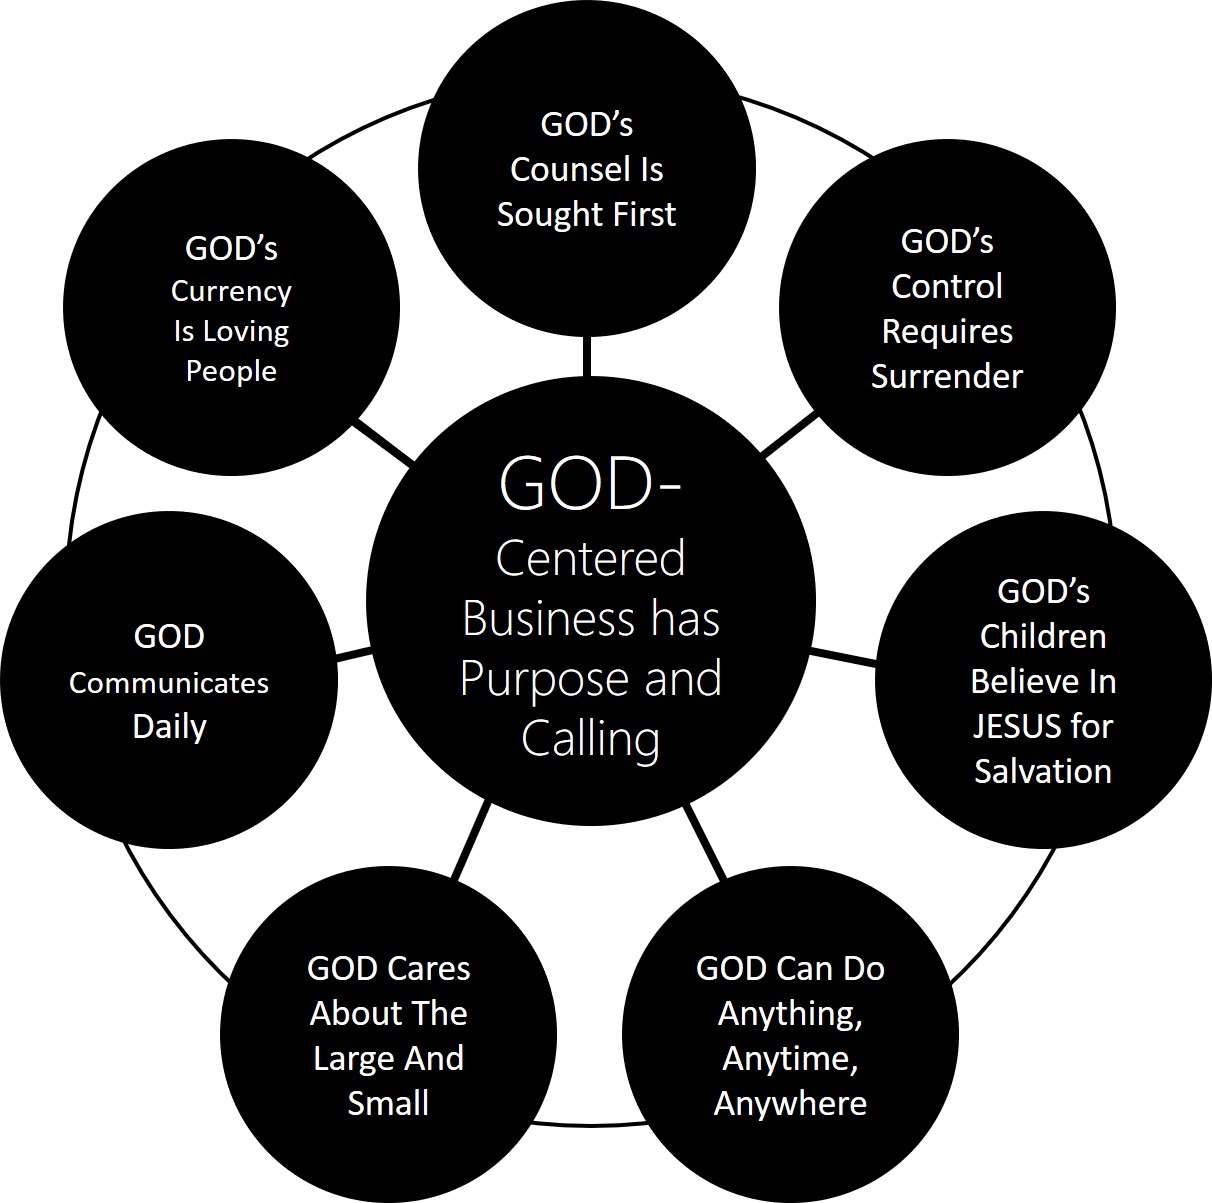 Guiding Principles of the GOD-Centered Methodology